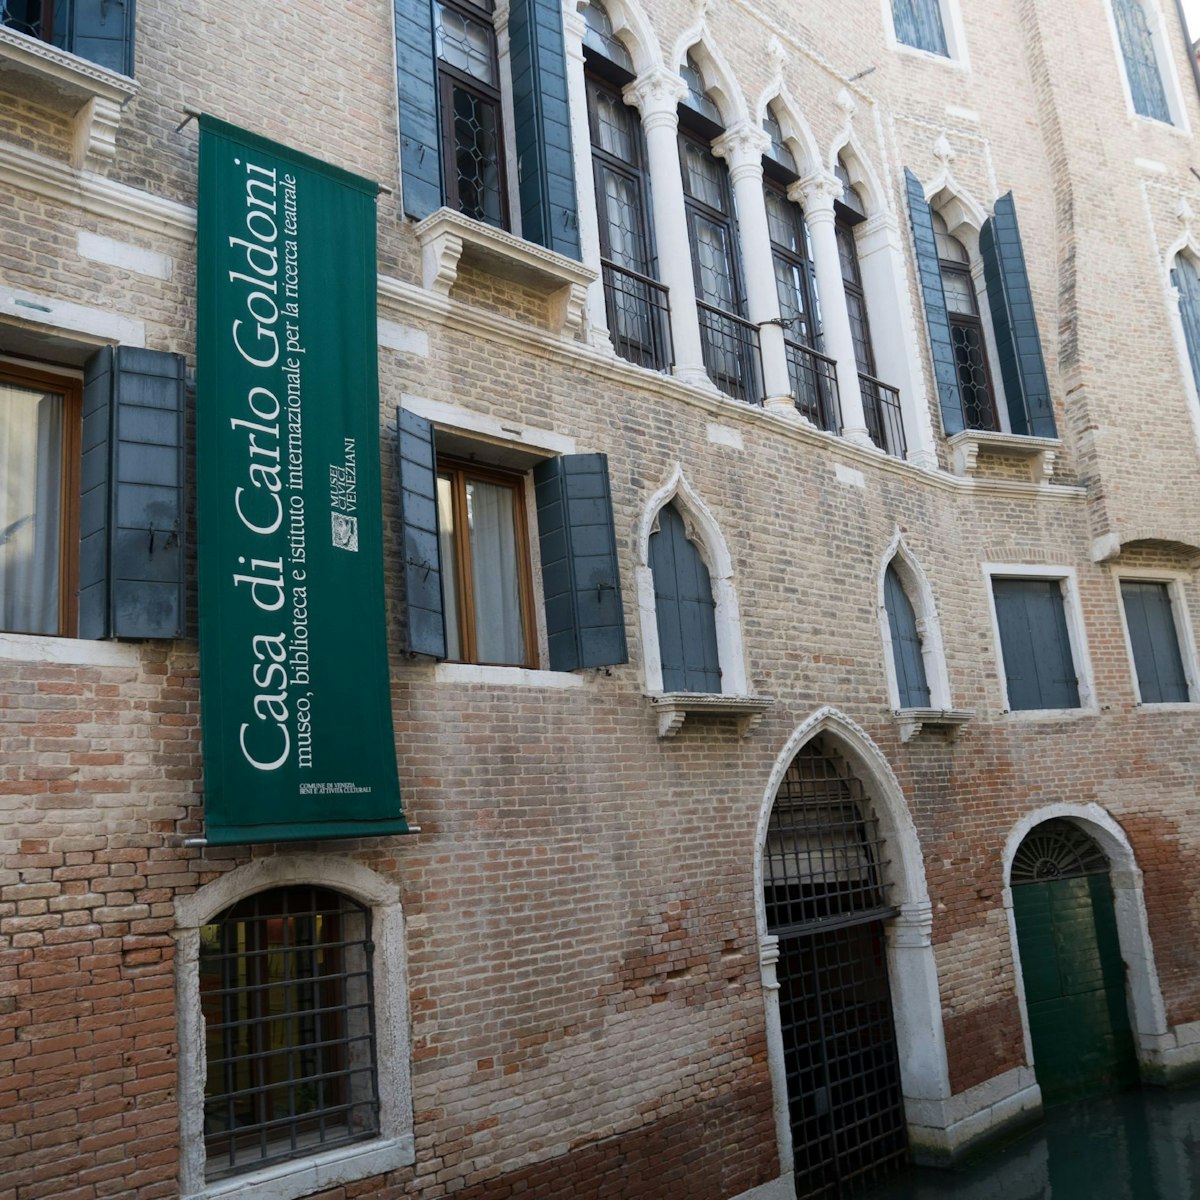 Goldoni's home is on a pretty canal